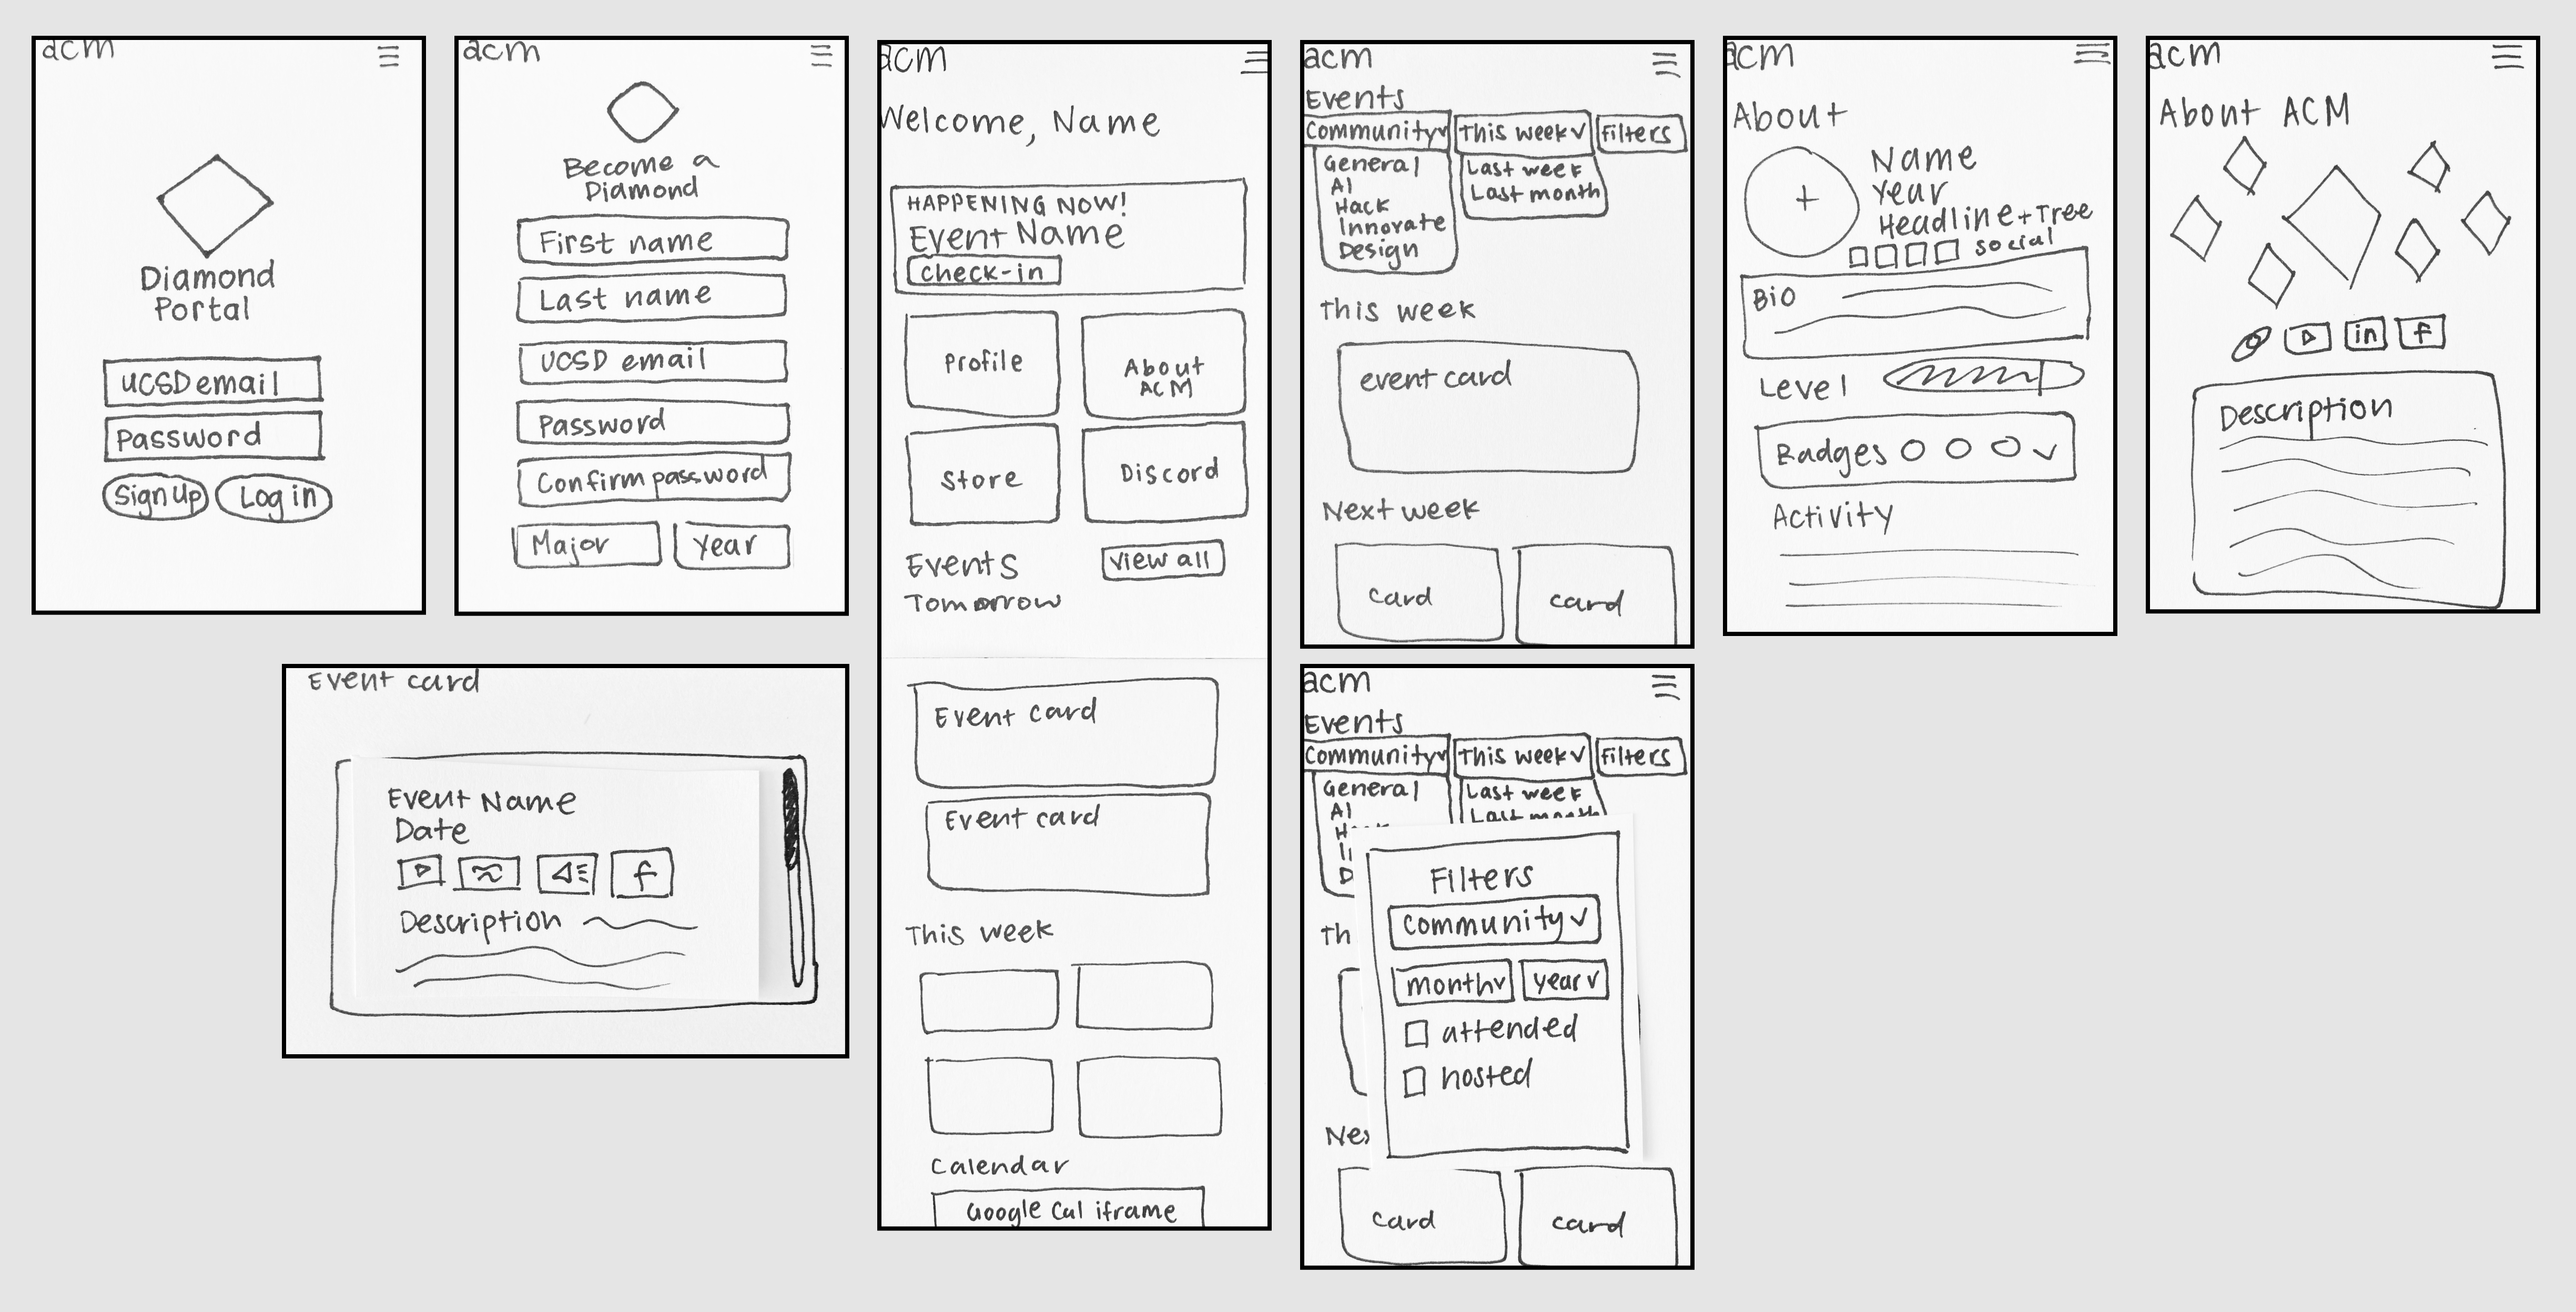 The low fidelity iterations of the UI